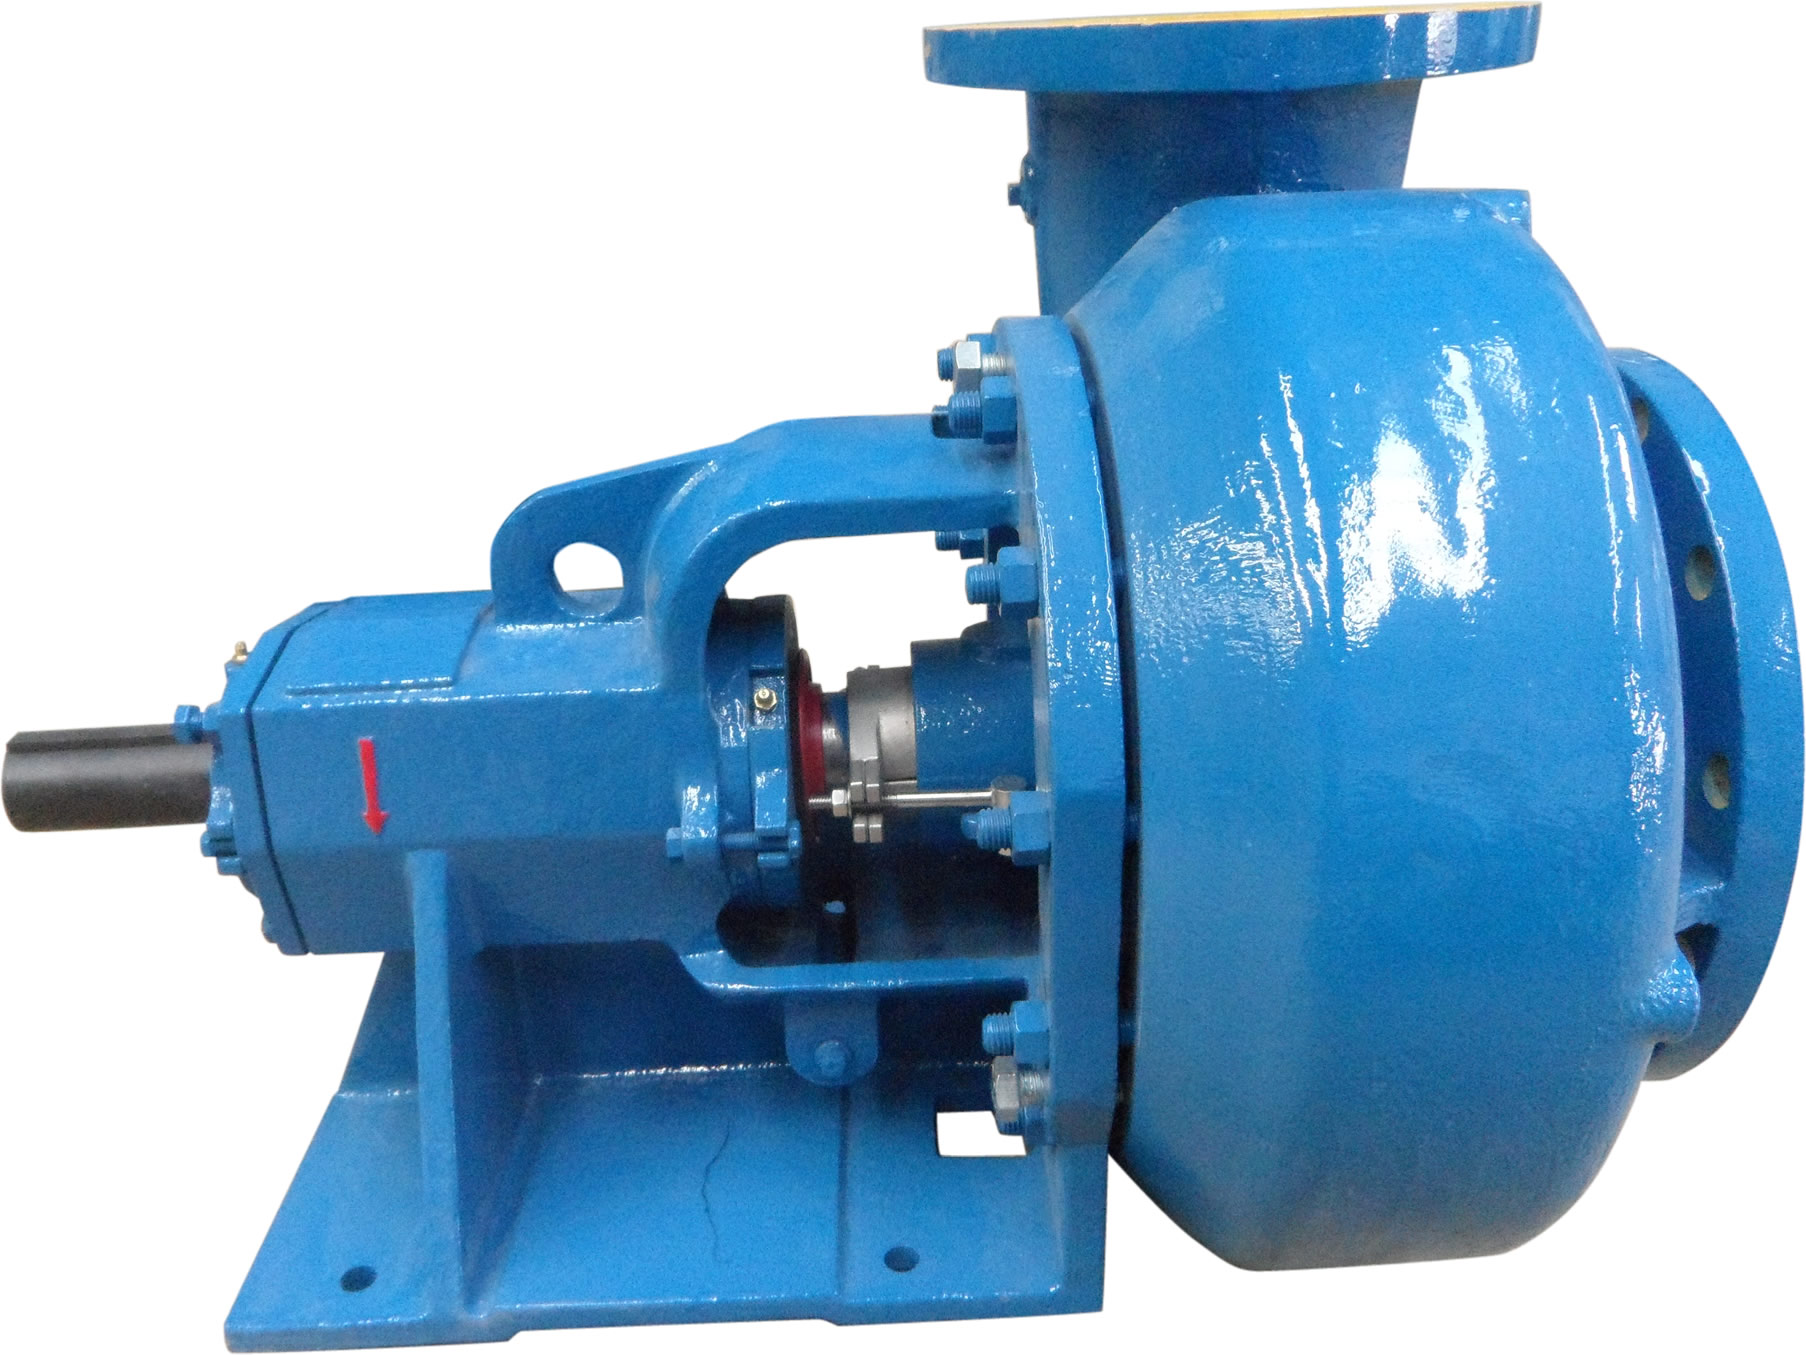 Our JDSB series pumps can be exchanged with mission sandmaster pumps